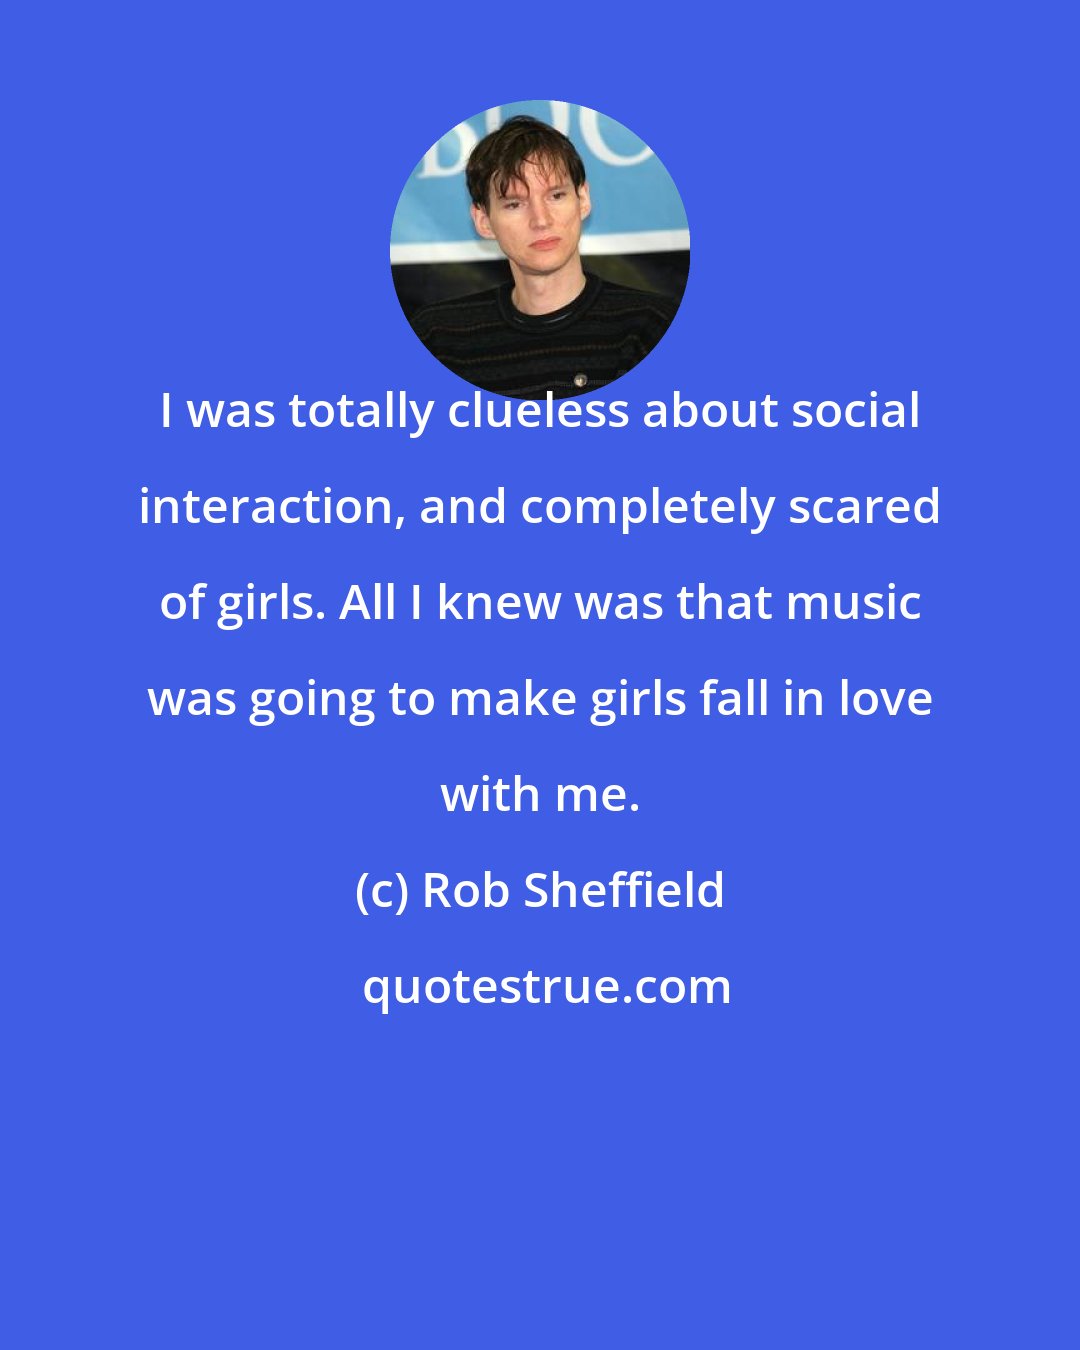 Rob Sheffield: I was totally clueless about social interaction, and completely scared of girls. All I knew was that music was going to make girls fall in love with me.